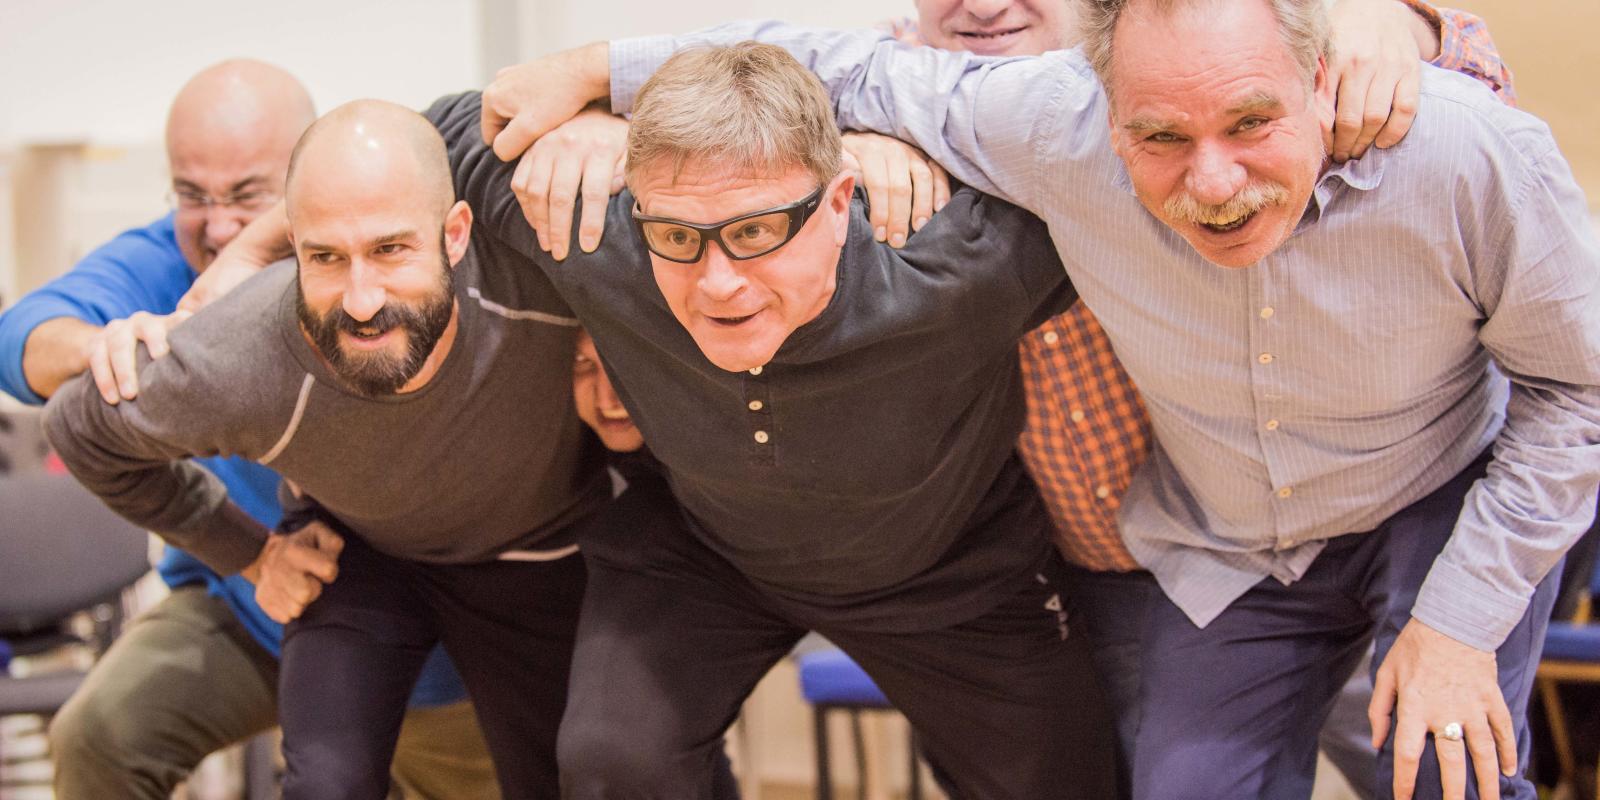 group of men huddled over smiling in Don Giovanni rehearsals